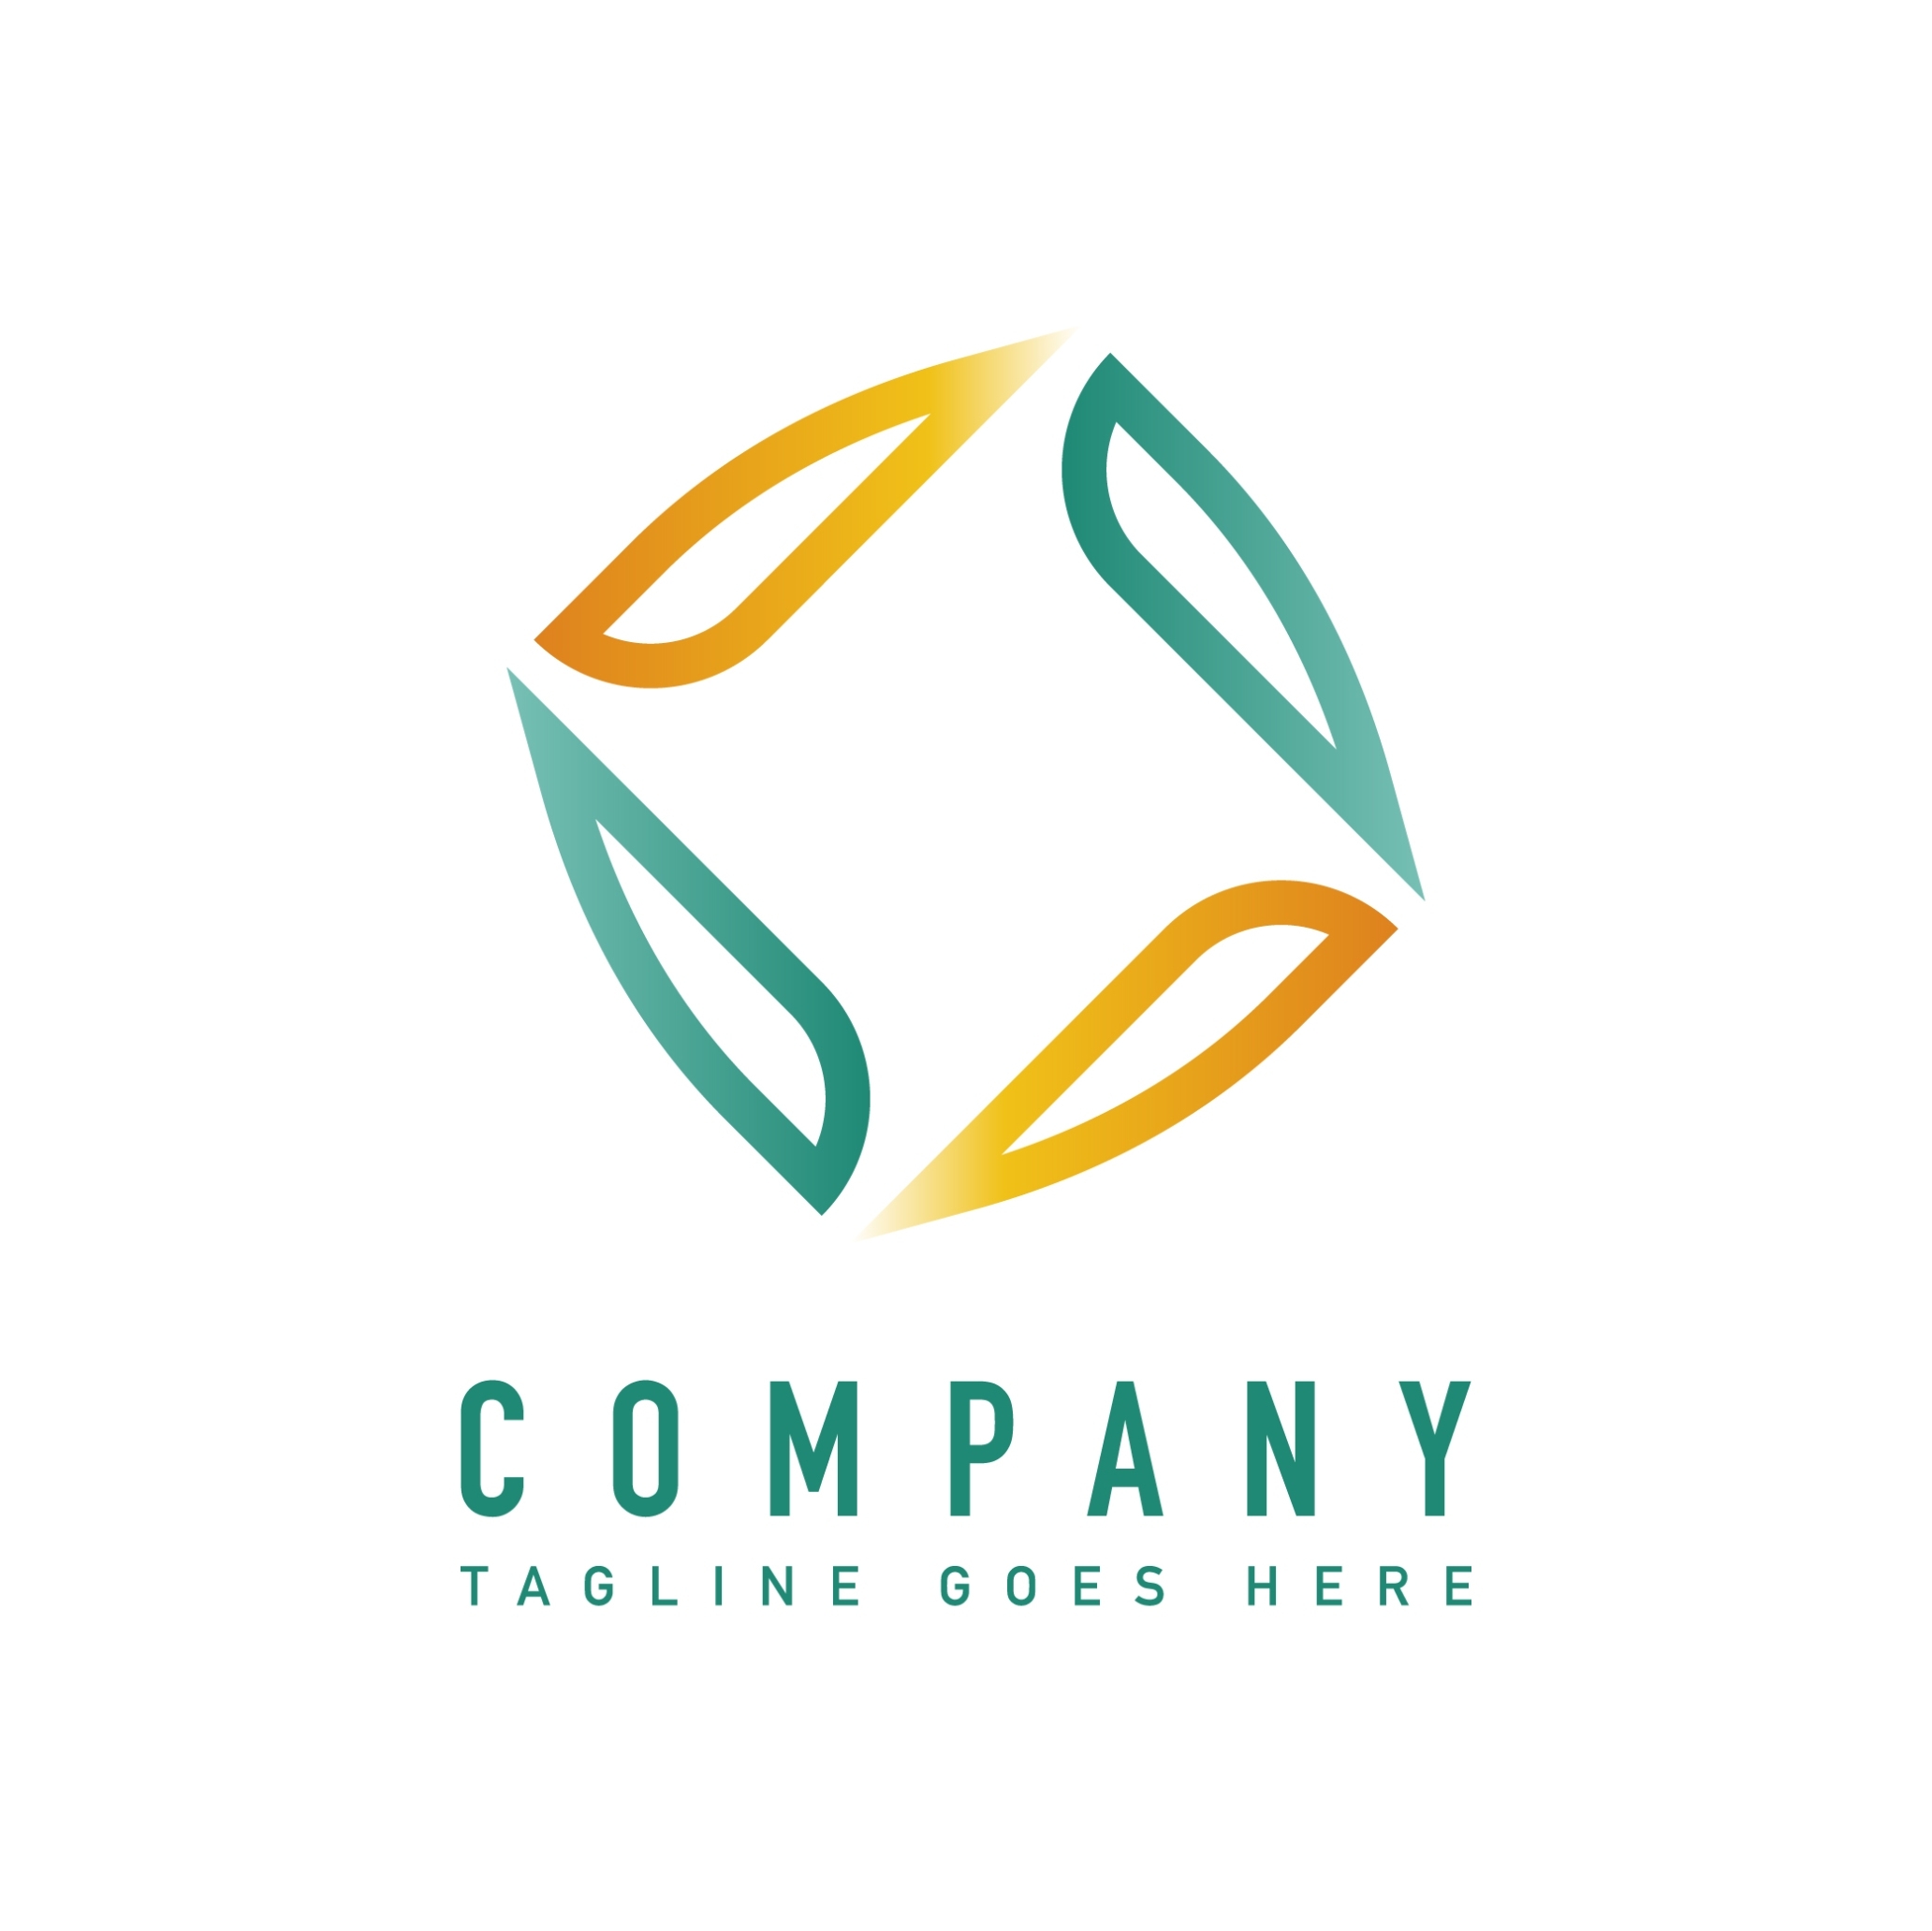 Modern Company Logo Design Vector - Download Free Vectors, Clipart within Business Logo Templates Free Download